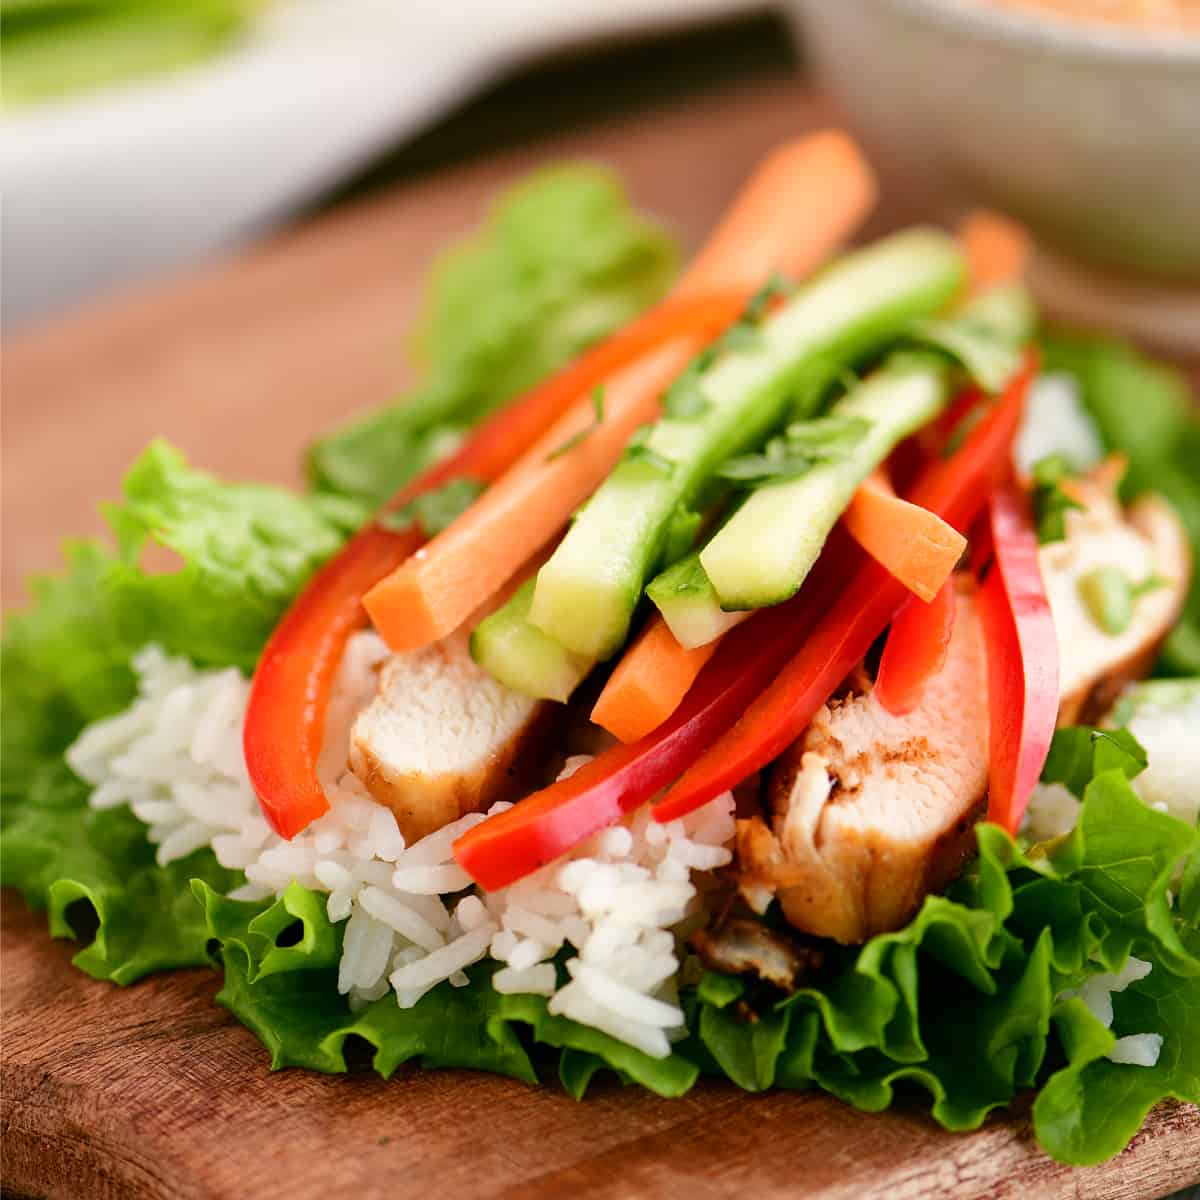 Lettuce leaf with chicken, rice, and veggies on top.